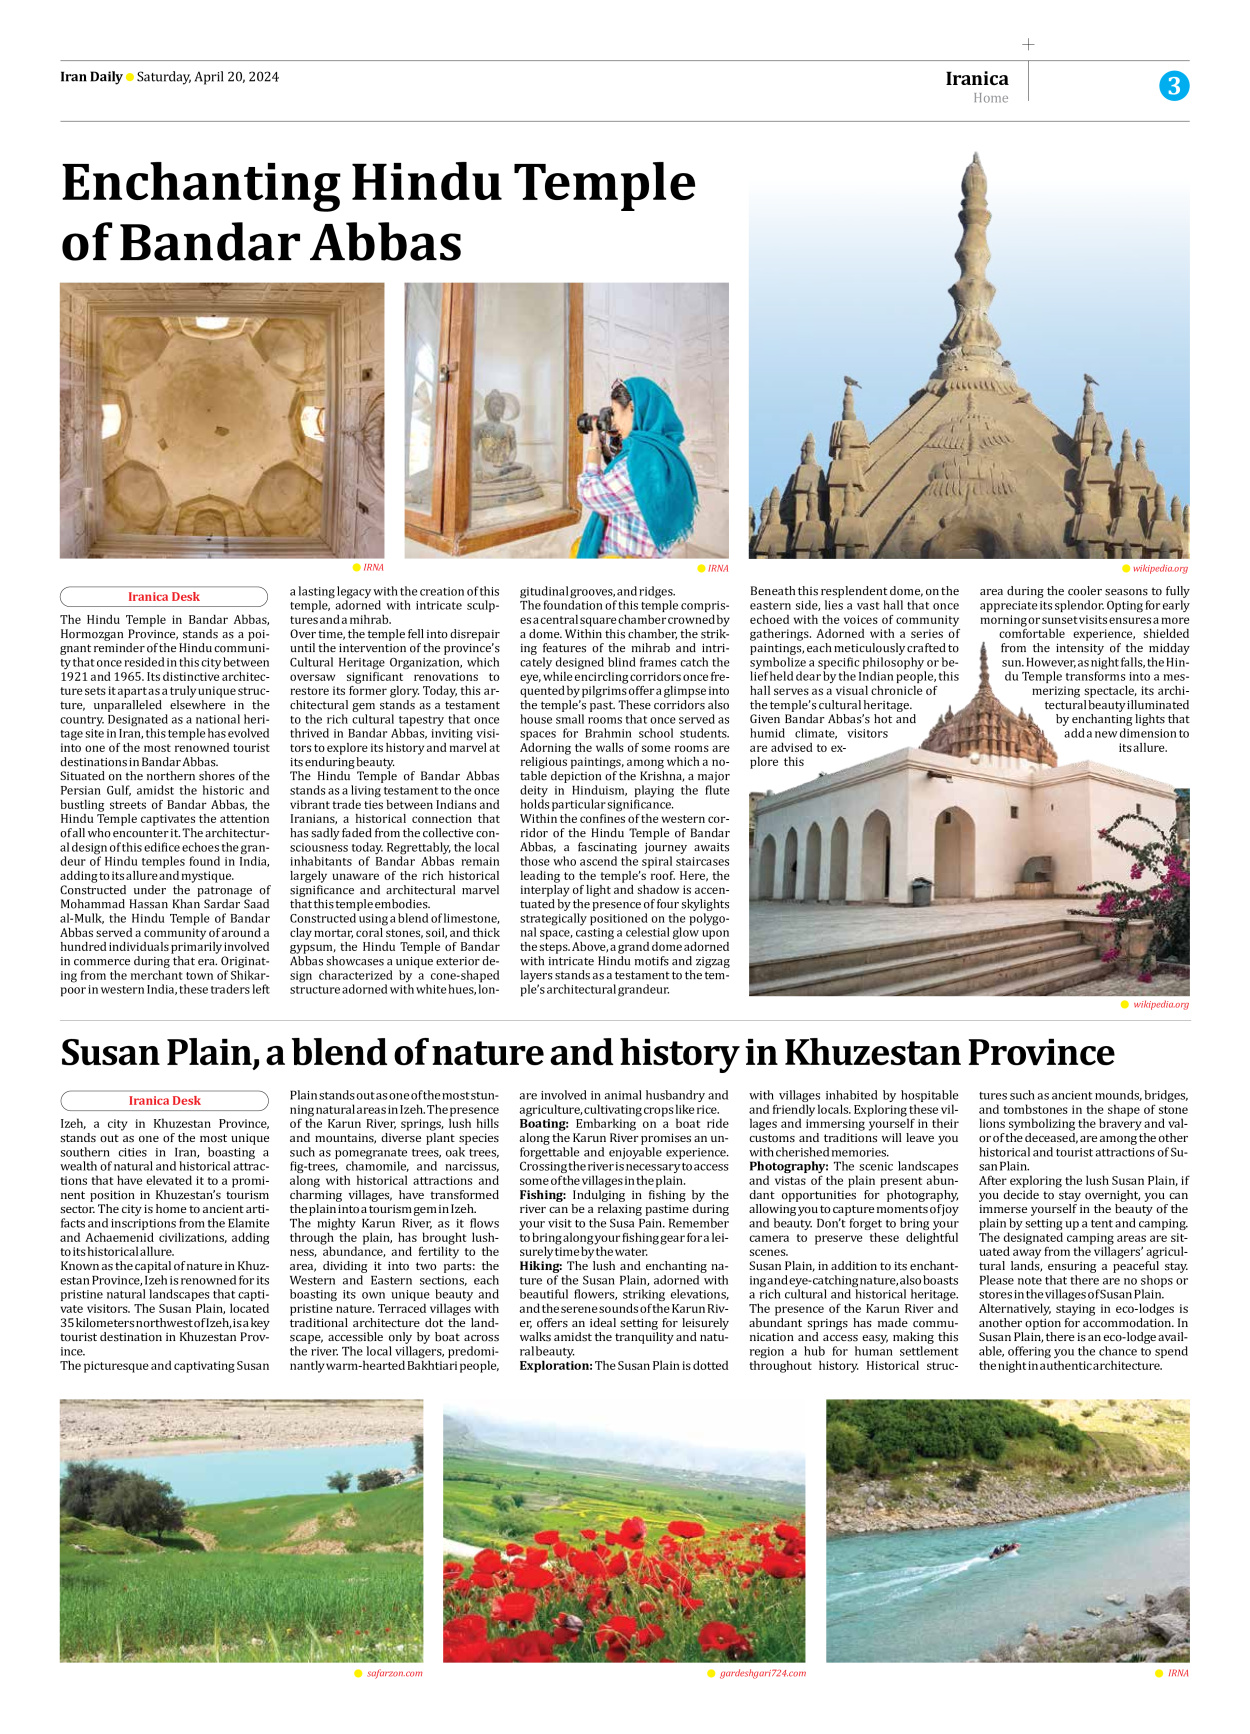 Iran Daily - Number Seven Thousand Five Hundred and Thirty Seven - 20 April 2024 - Page 3